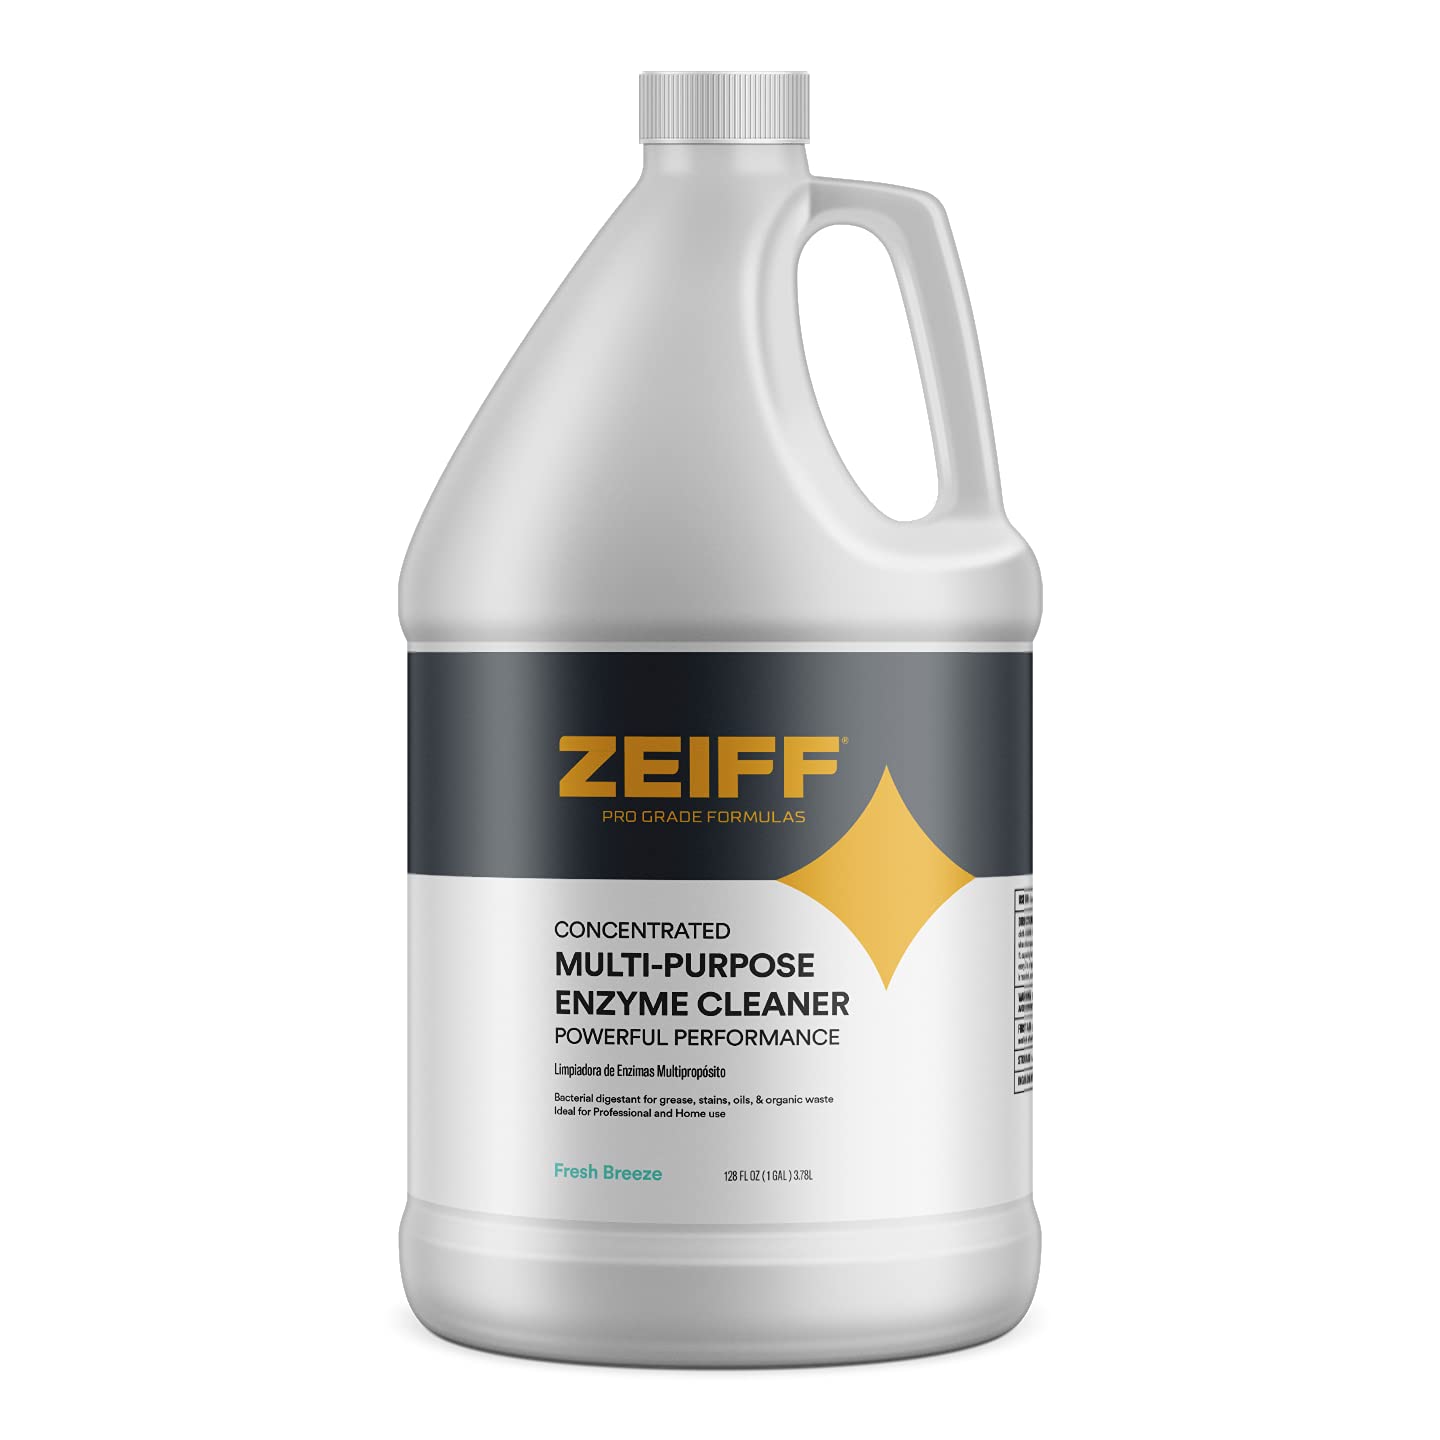 Zeiff Pro-Grade Multi-Purpose Probiotic Enzyme Cleaner - Pet Stain and Odor Remover, Drain Cleaner - Powerful Cleaning & Odor Eliminating Formula F...